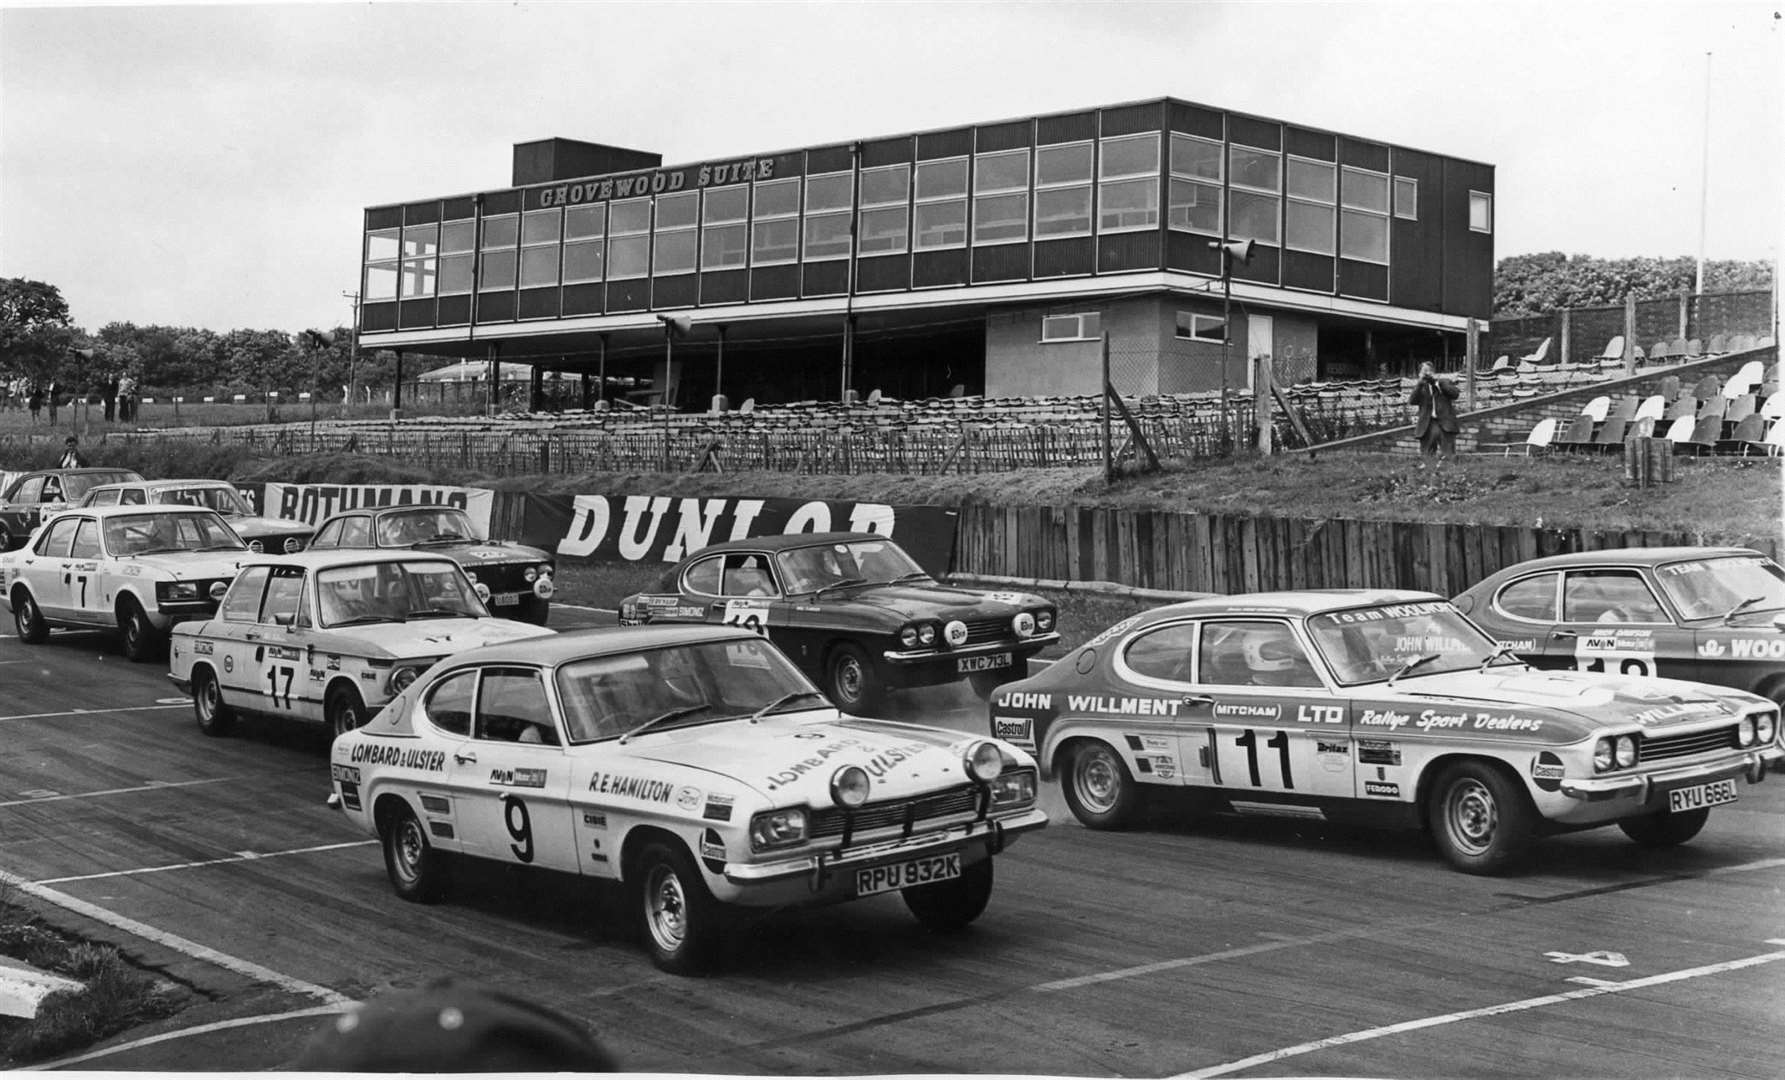 The start of a 20-minute race at Brands in 1973 which included a Capri 3000, centre of picture, owned by Prince Michael and driven by Nigel Clarkson